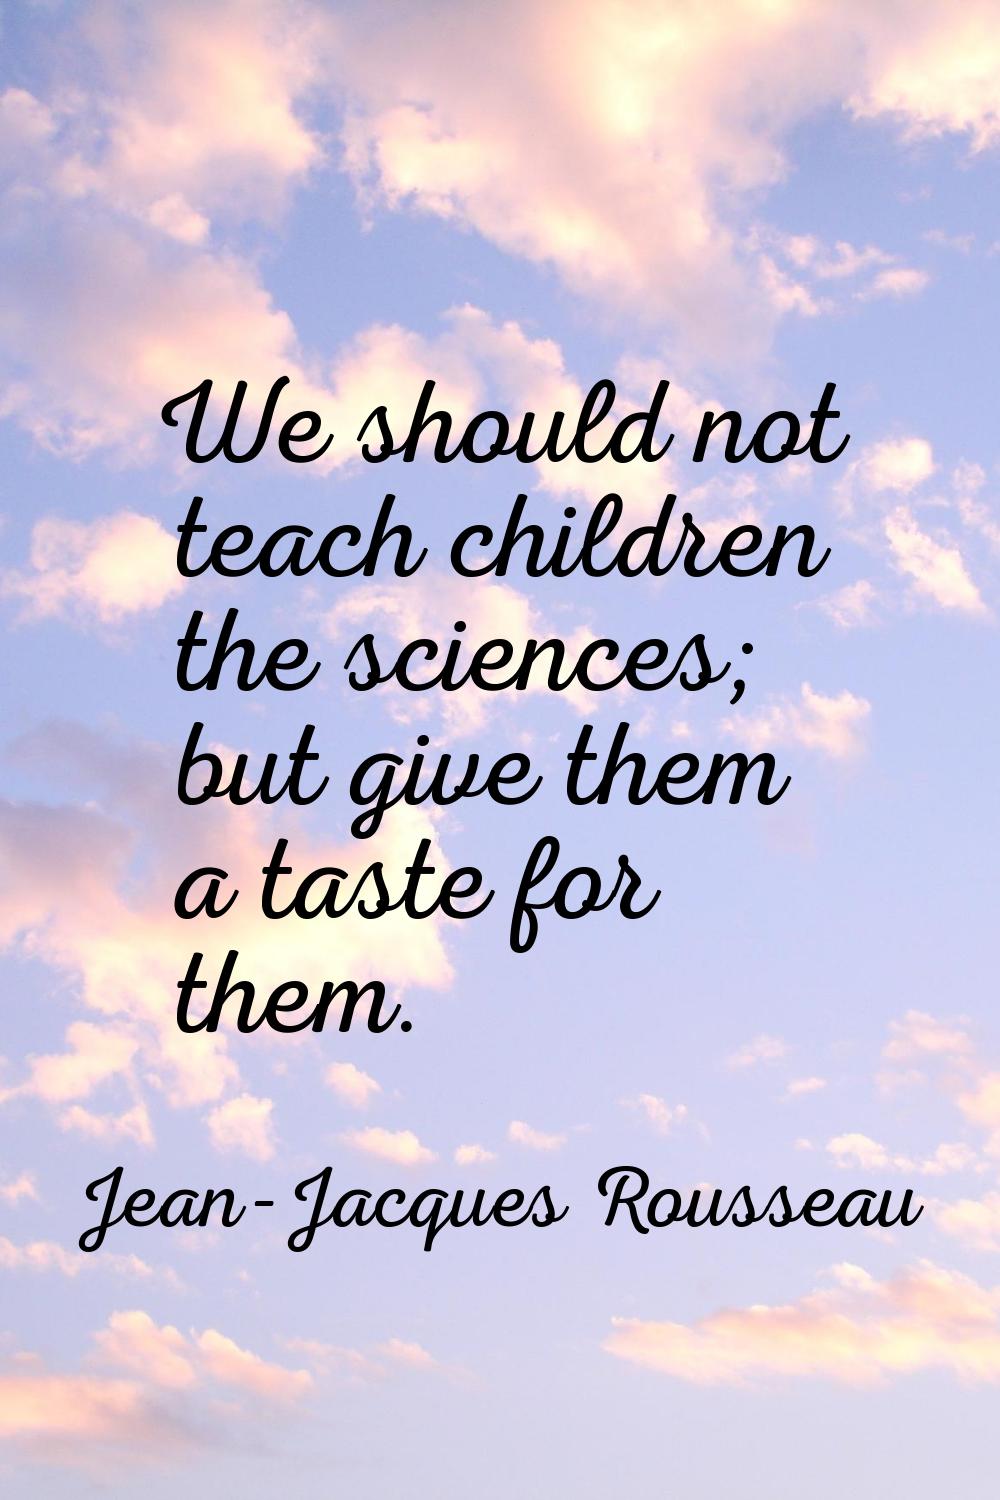 We should not teach children the sciences; but give them a taste for them.